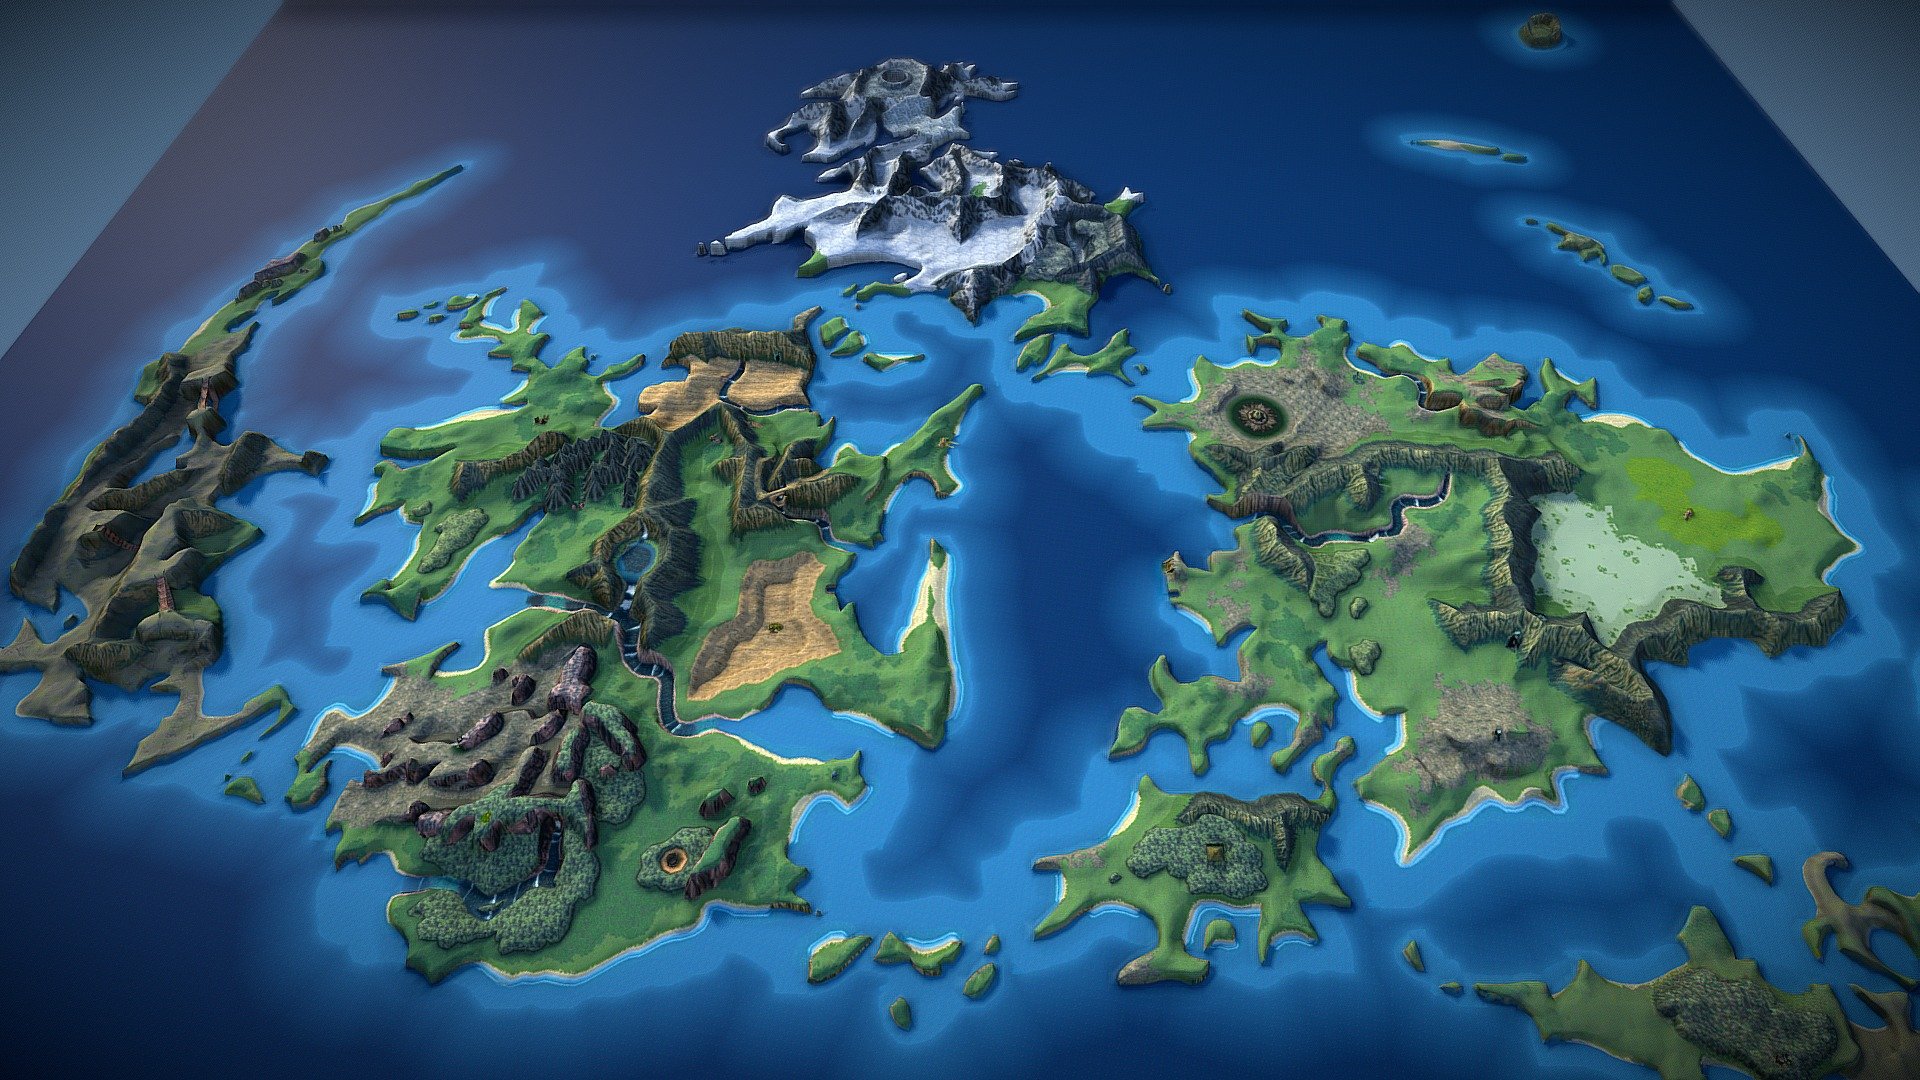 A 3d map of the world from the game Final Fantasy VII, set on the planet known as Gaia or Gaea 3d model